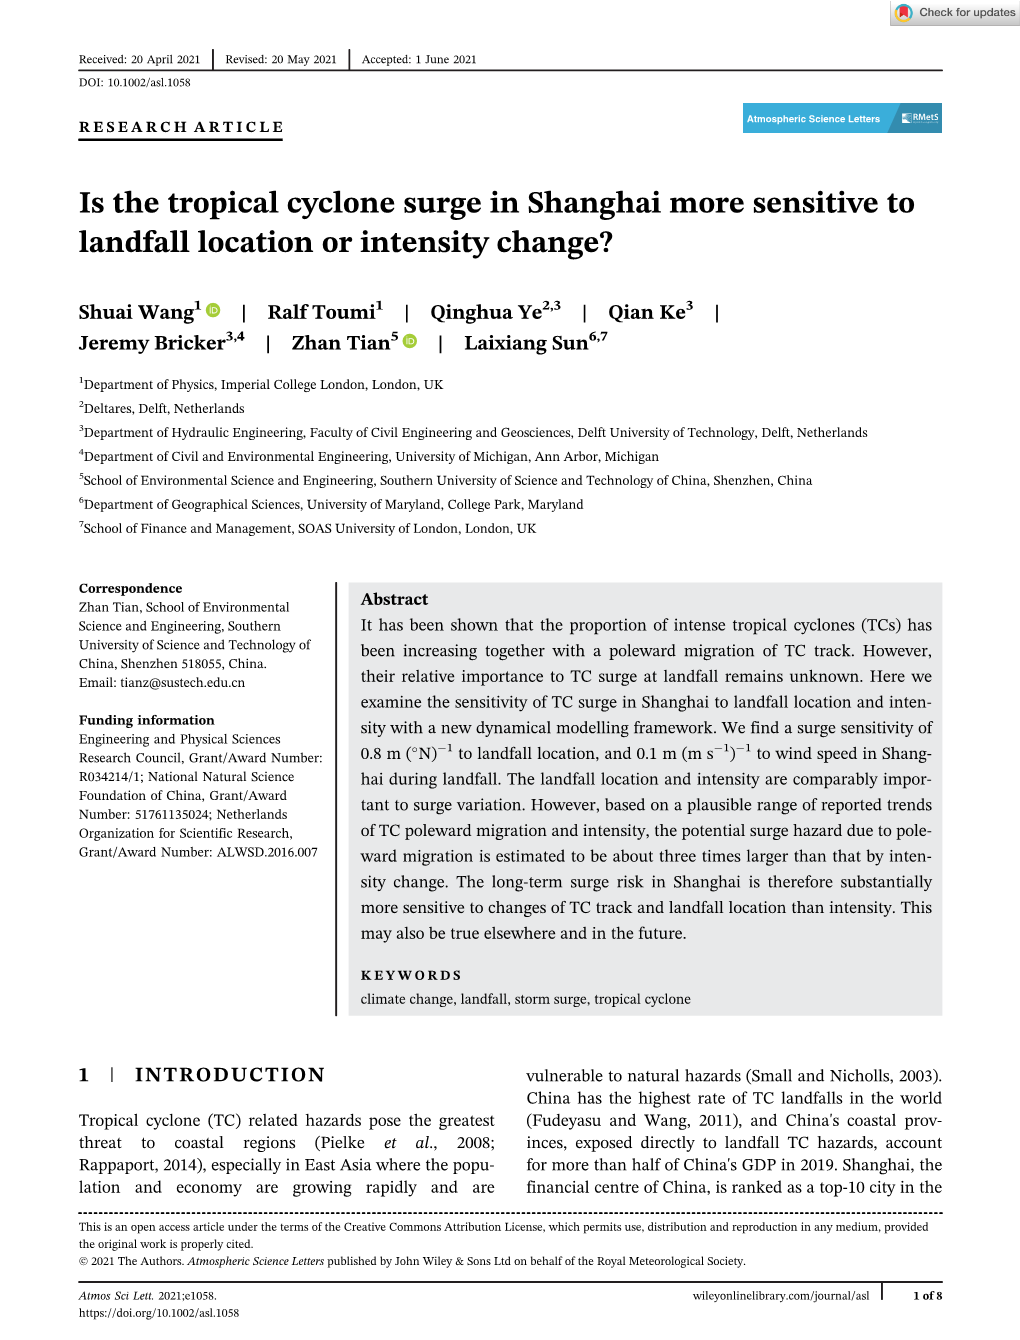 Is the Tropical Cyclone Surge in Shanghai More Sensitive to Landfall Location Or Intensity Change?